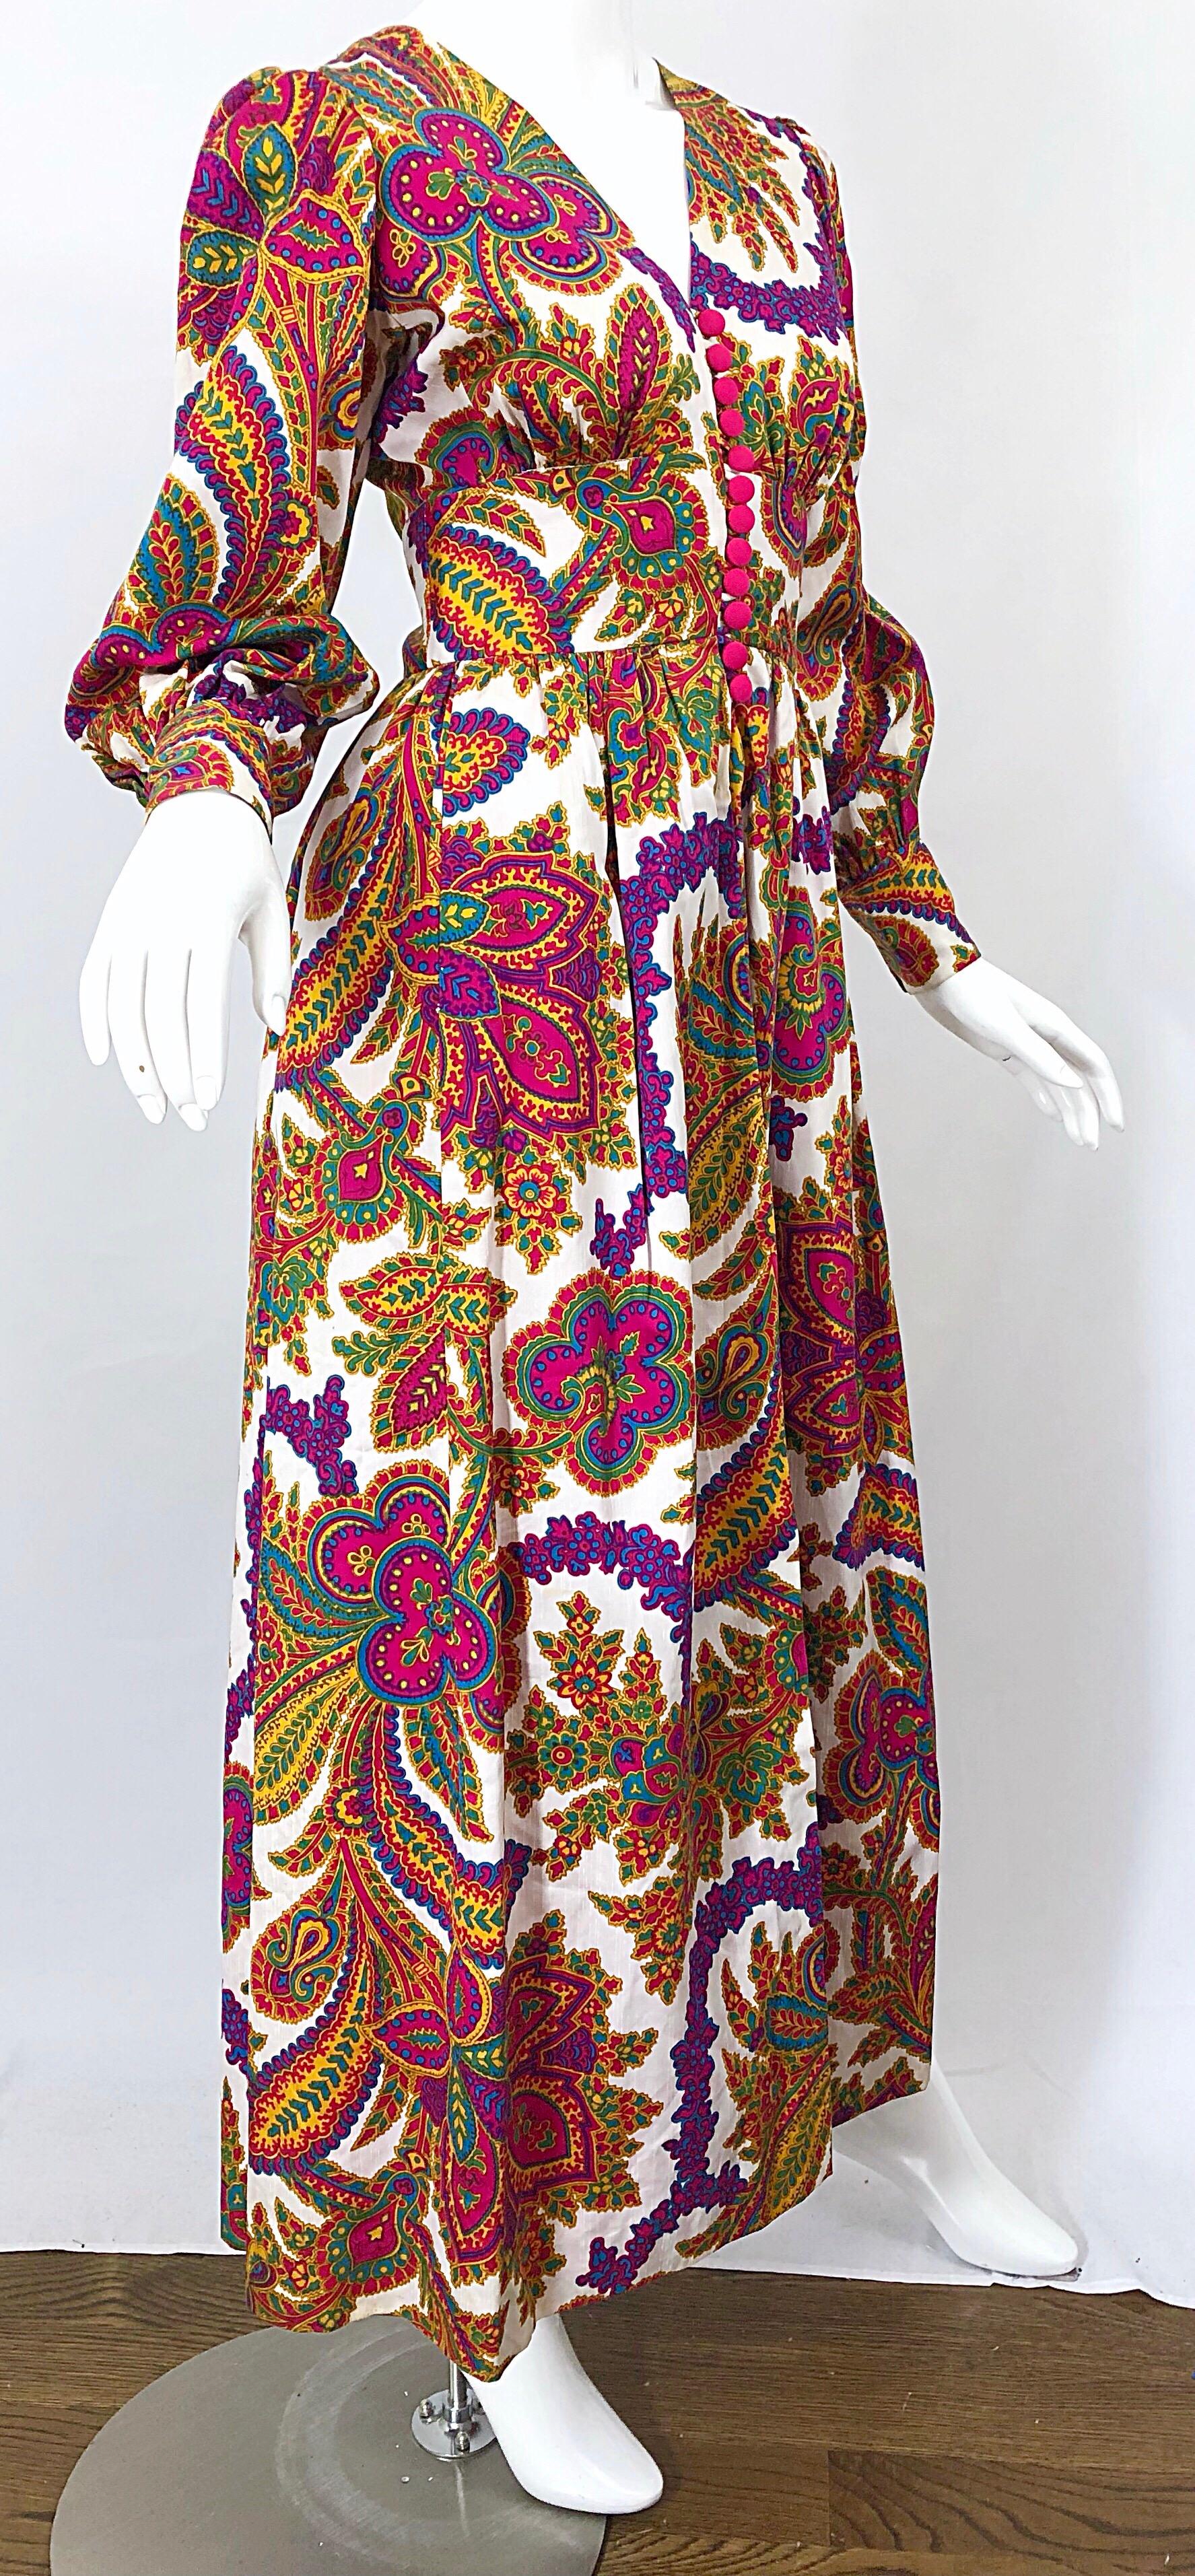 Brown Amazing 1970s Regal Paisley Boho Chic Colorful Vintage 70s Silk Gown Maxi Dress